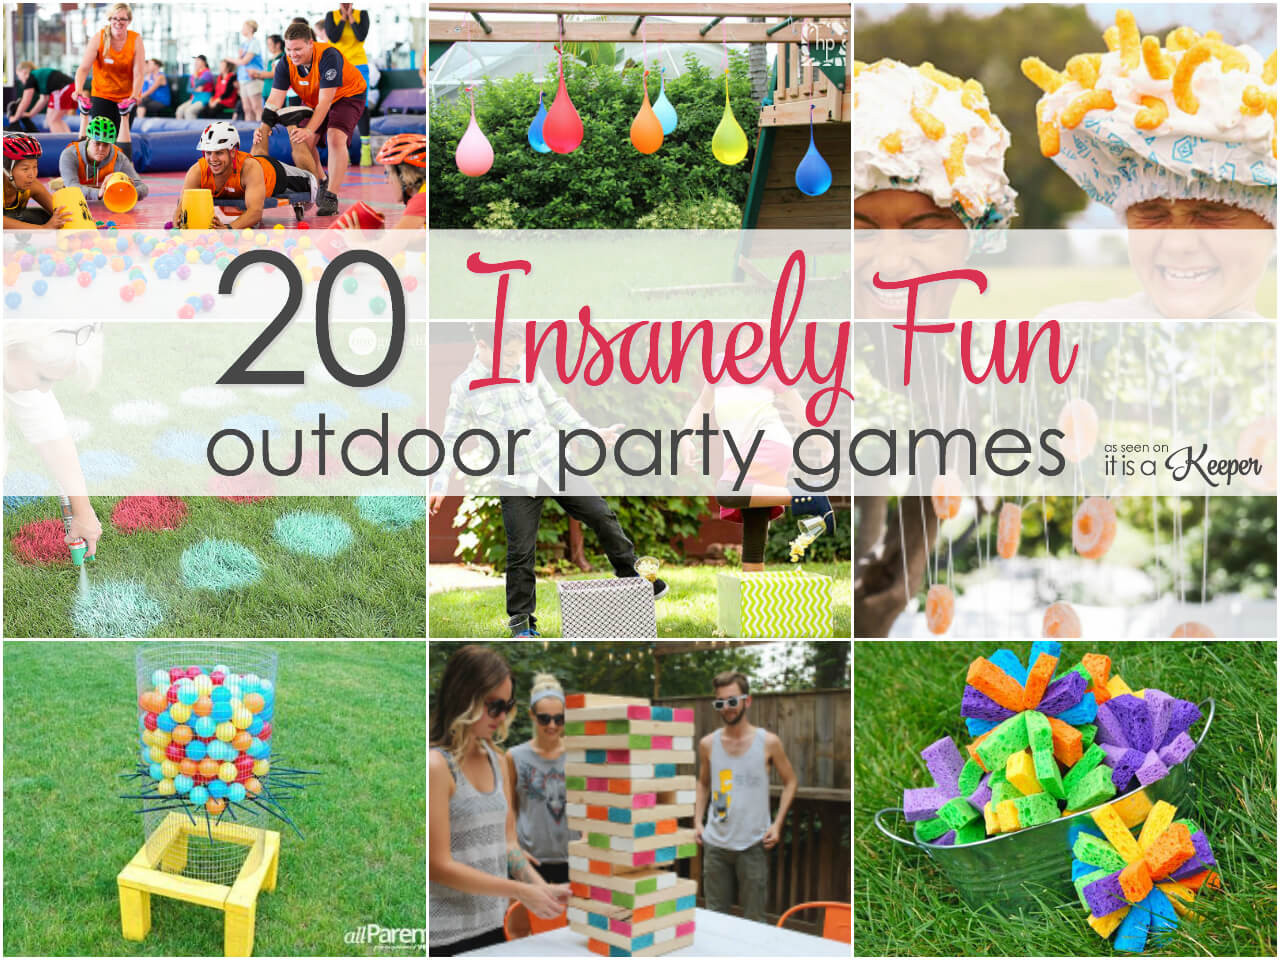 Backyard Party Games Ideas
 Outdoor Party Games 20 insanely fun games for your next